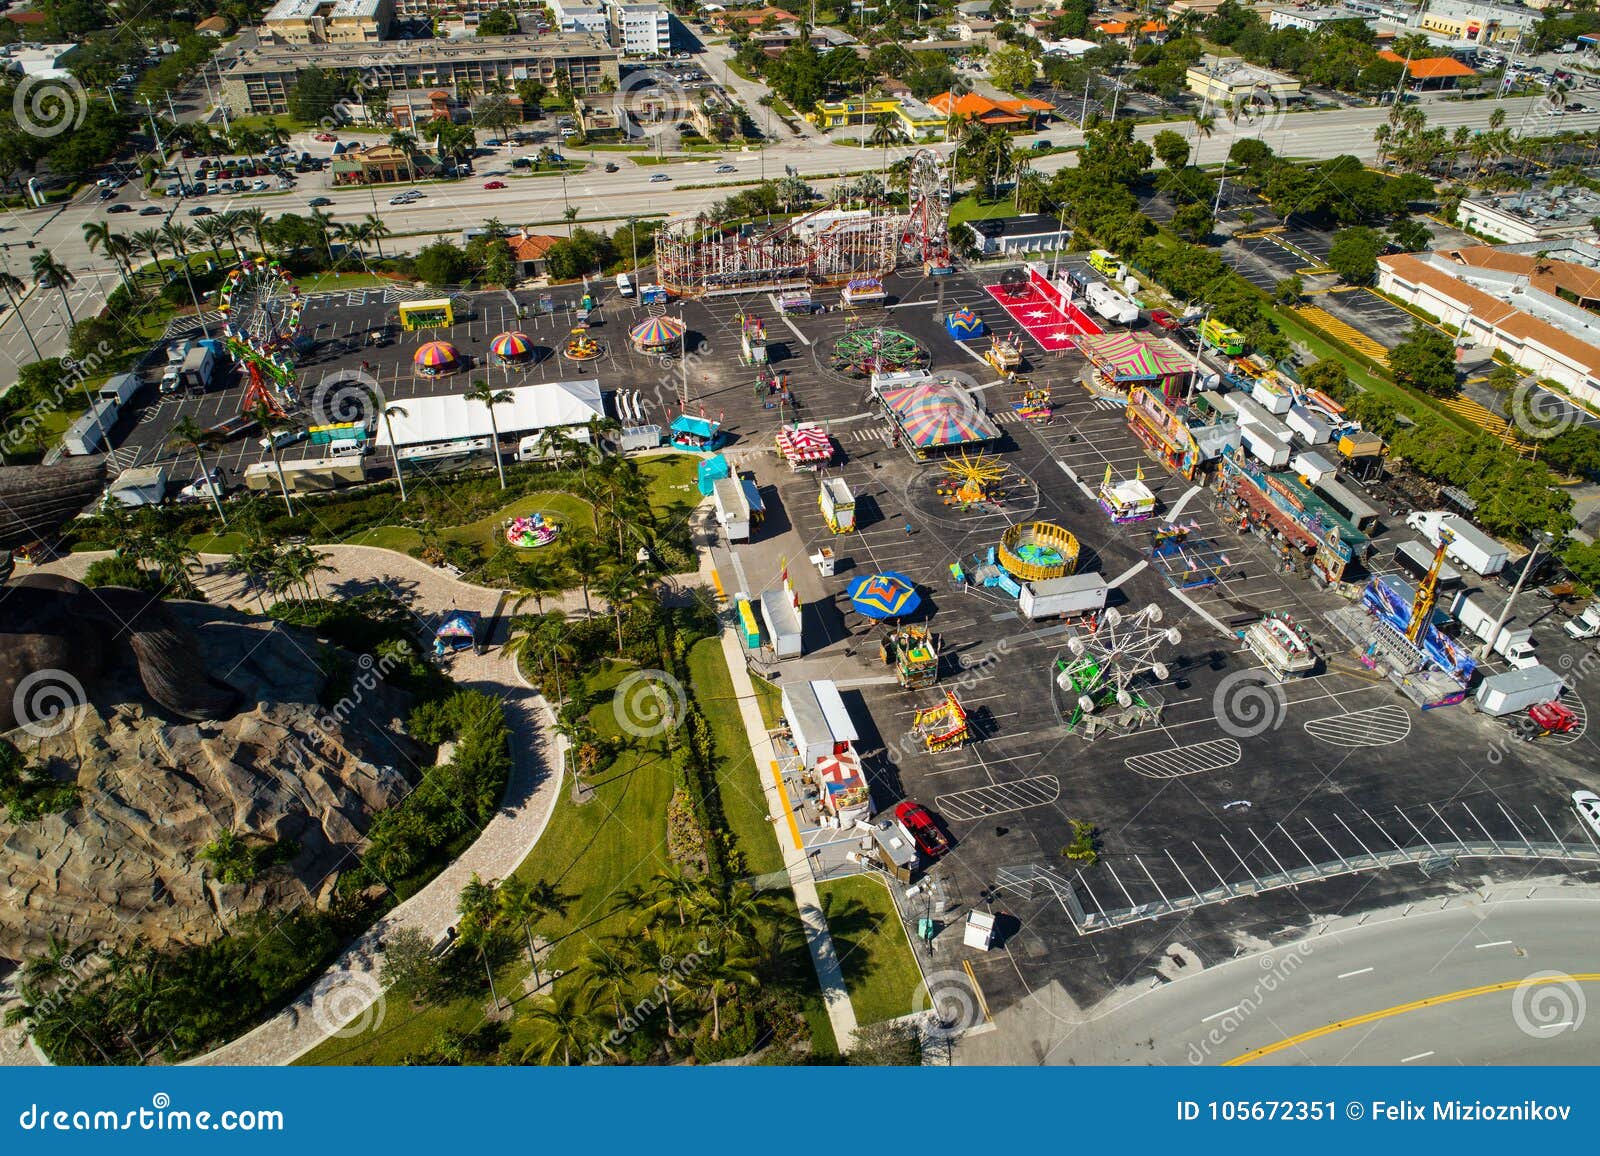 aerial image of the broward county youth fair in hallandale fl